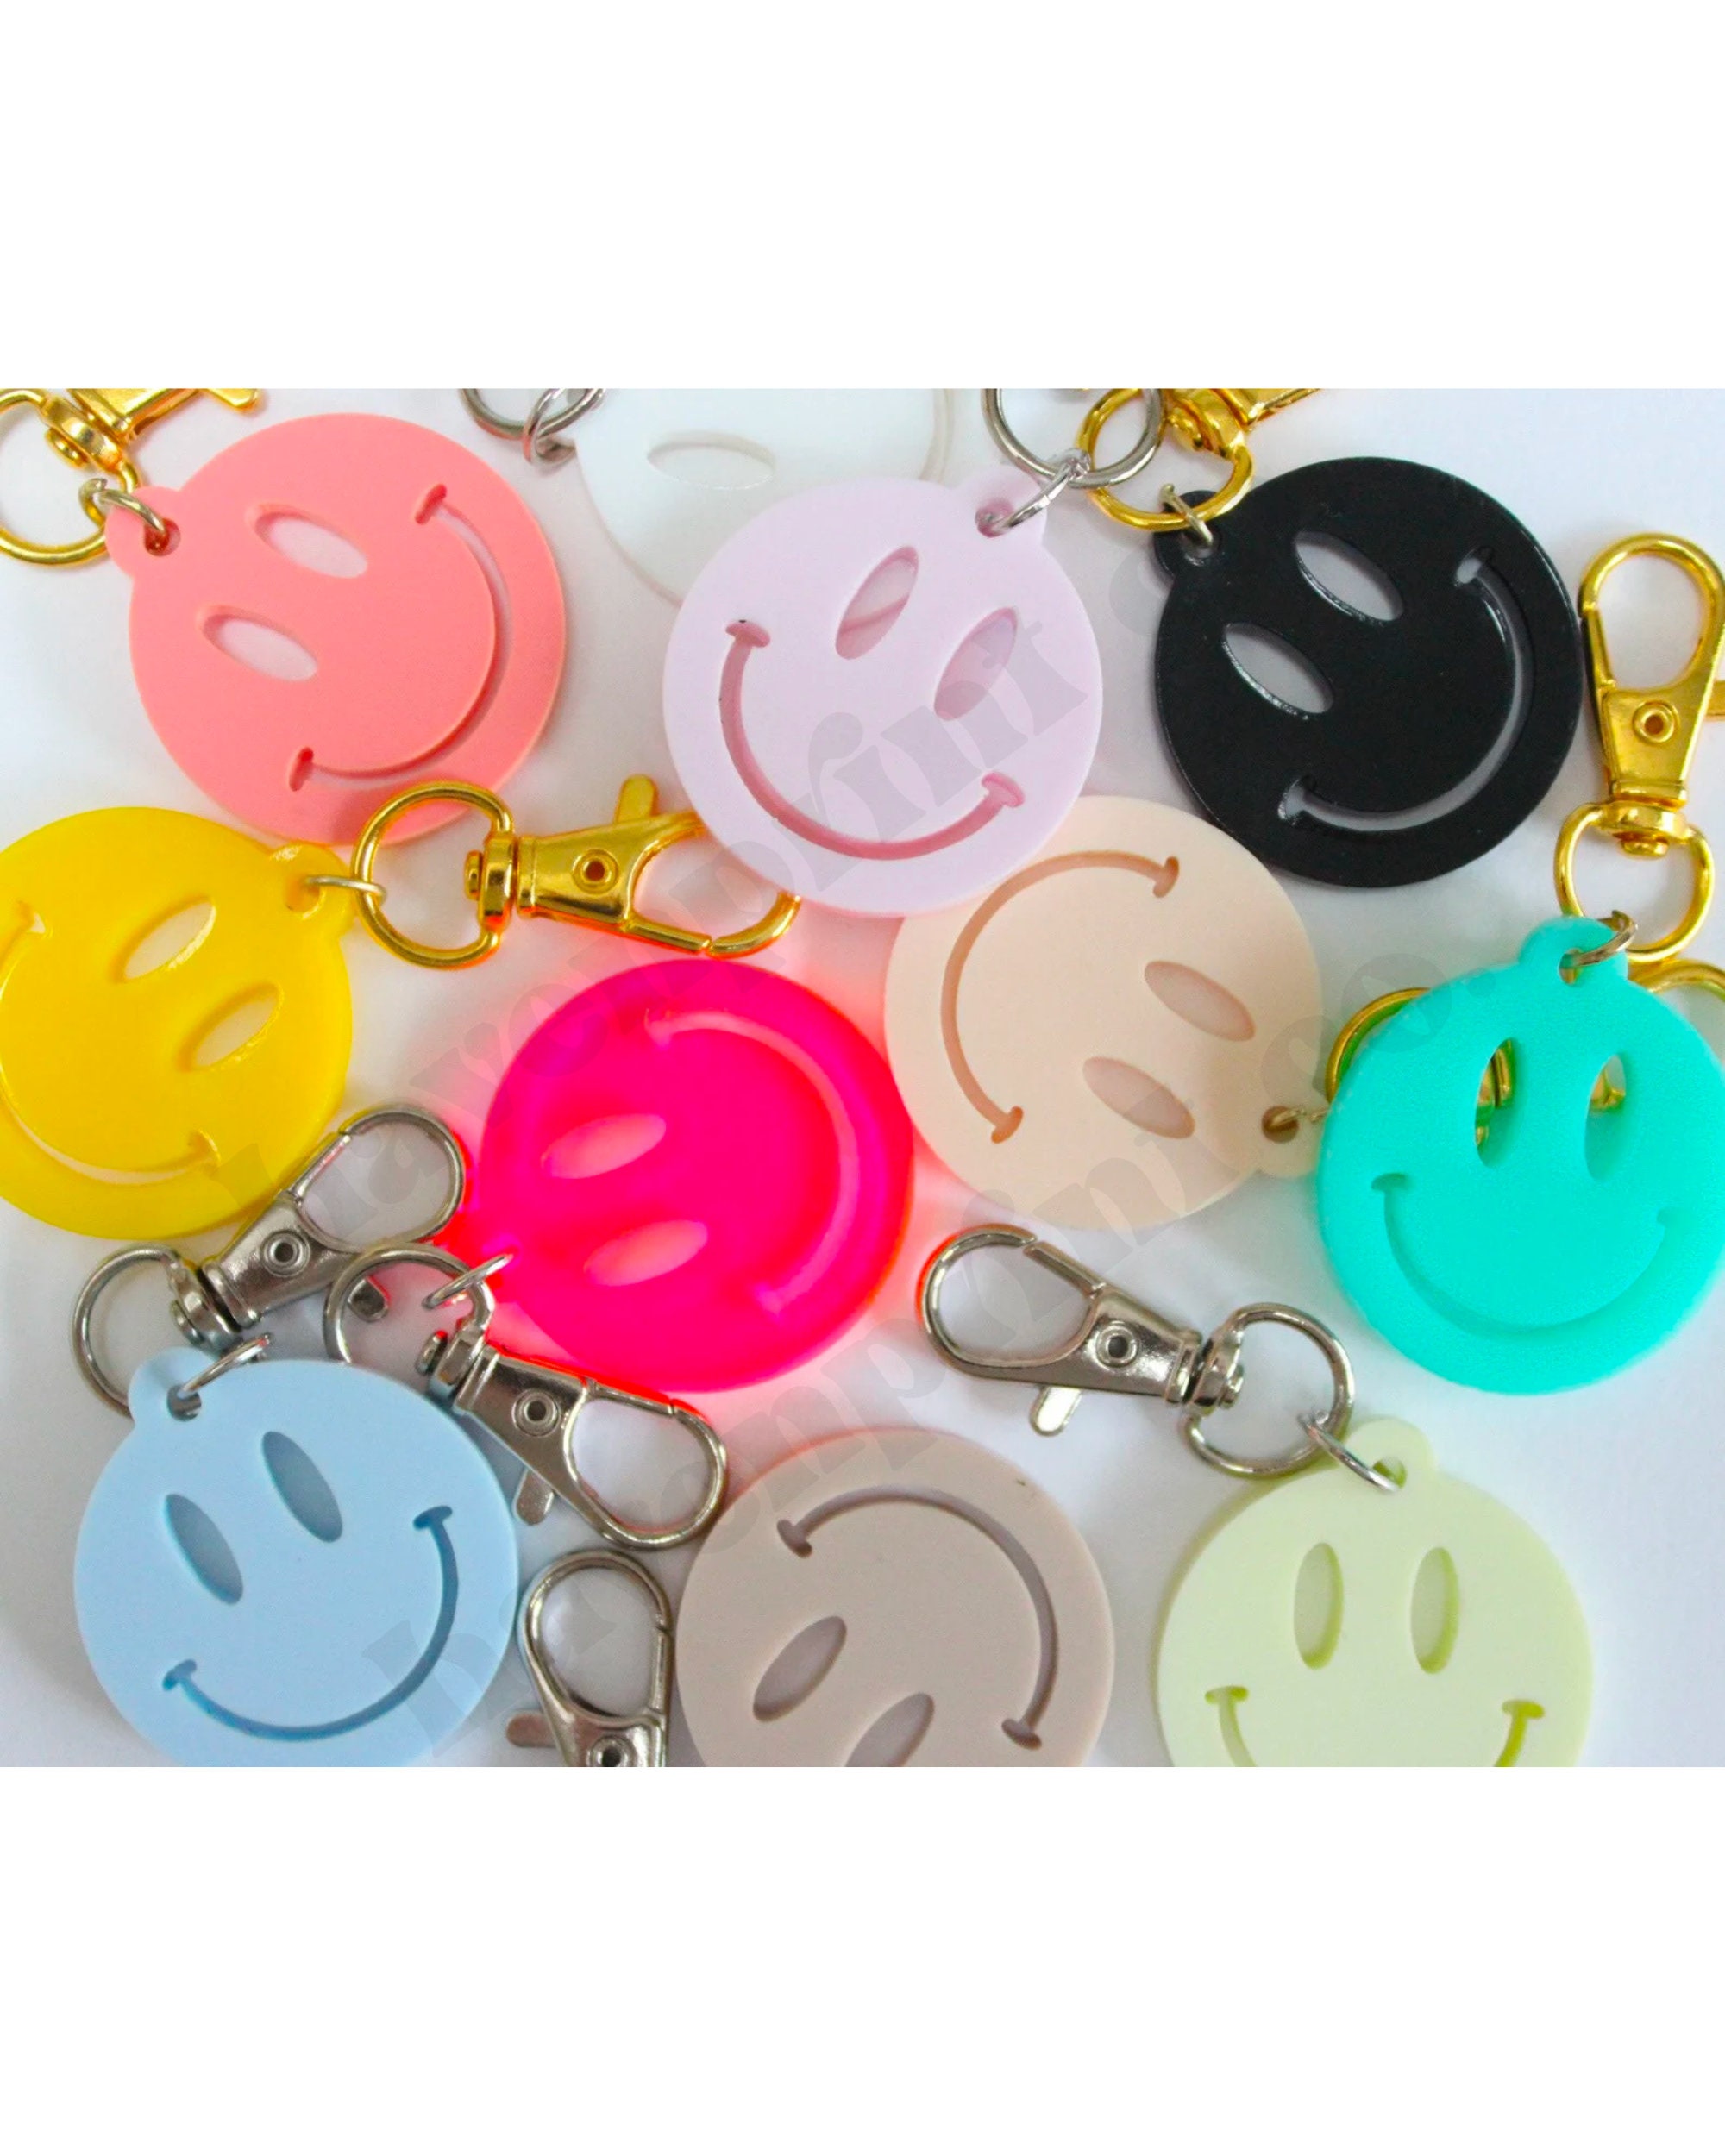 12 Pcs Preppy Smile Key Chain Acrylic Smile Face Keychain Happy Face  Aesthetic Preppy Keychain for Backpack Cute Women's Keyrings and Keychains  for